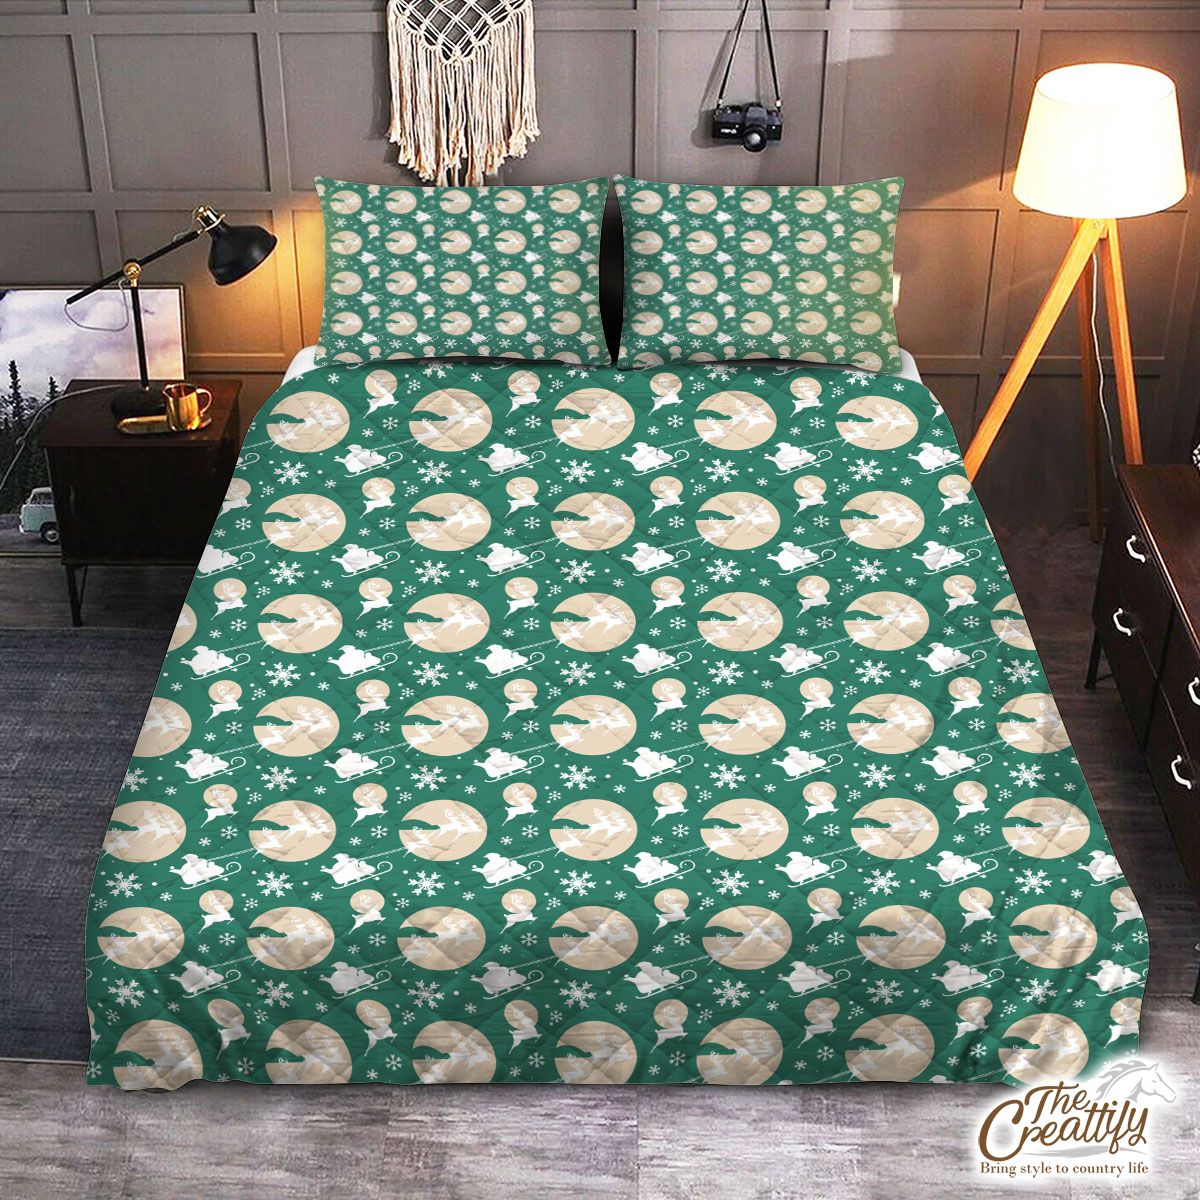 Green And White Santa Sleigh With Snowflake Quilt Set